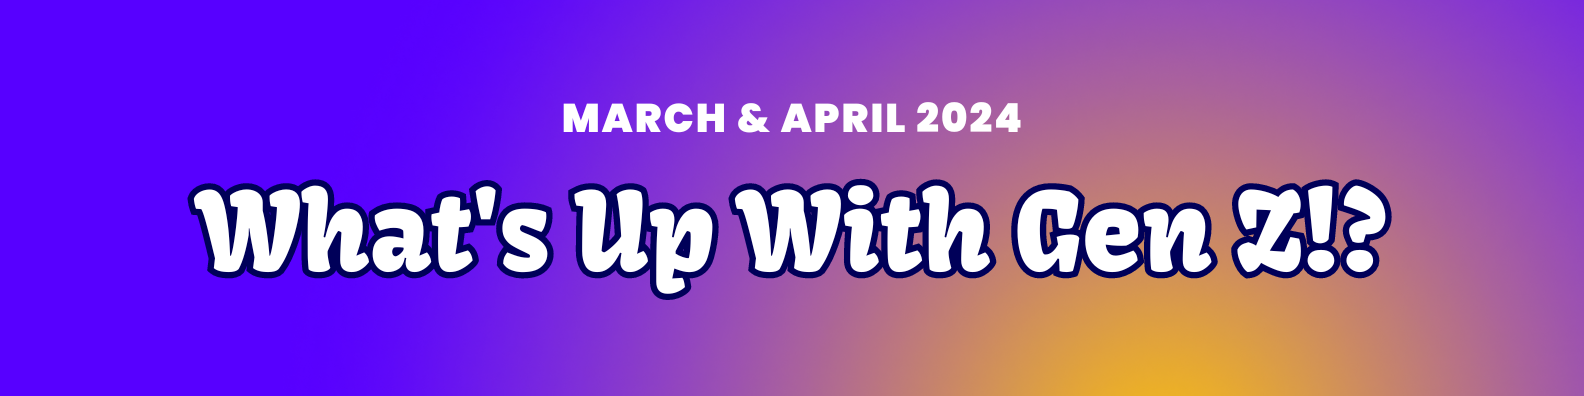 March + April 2024 Newsletter: What’s Up with Gen Z!?